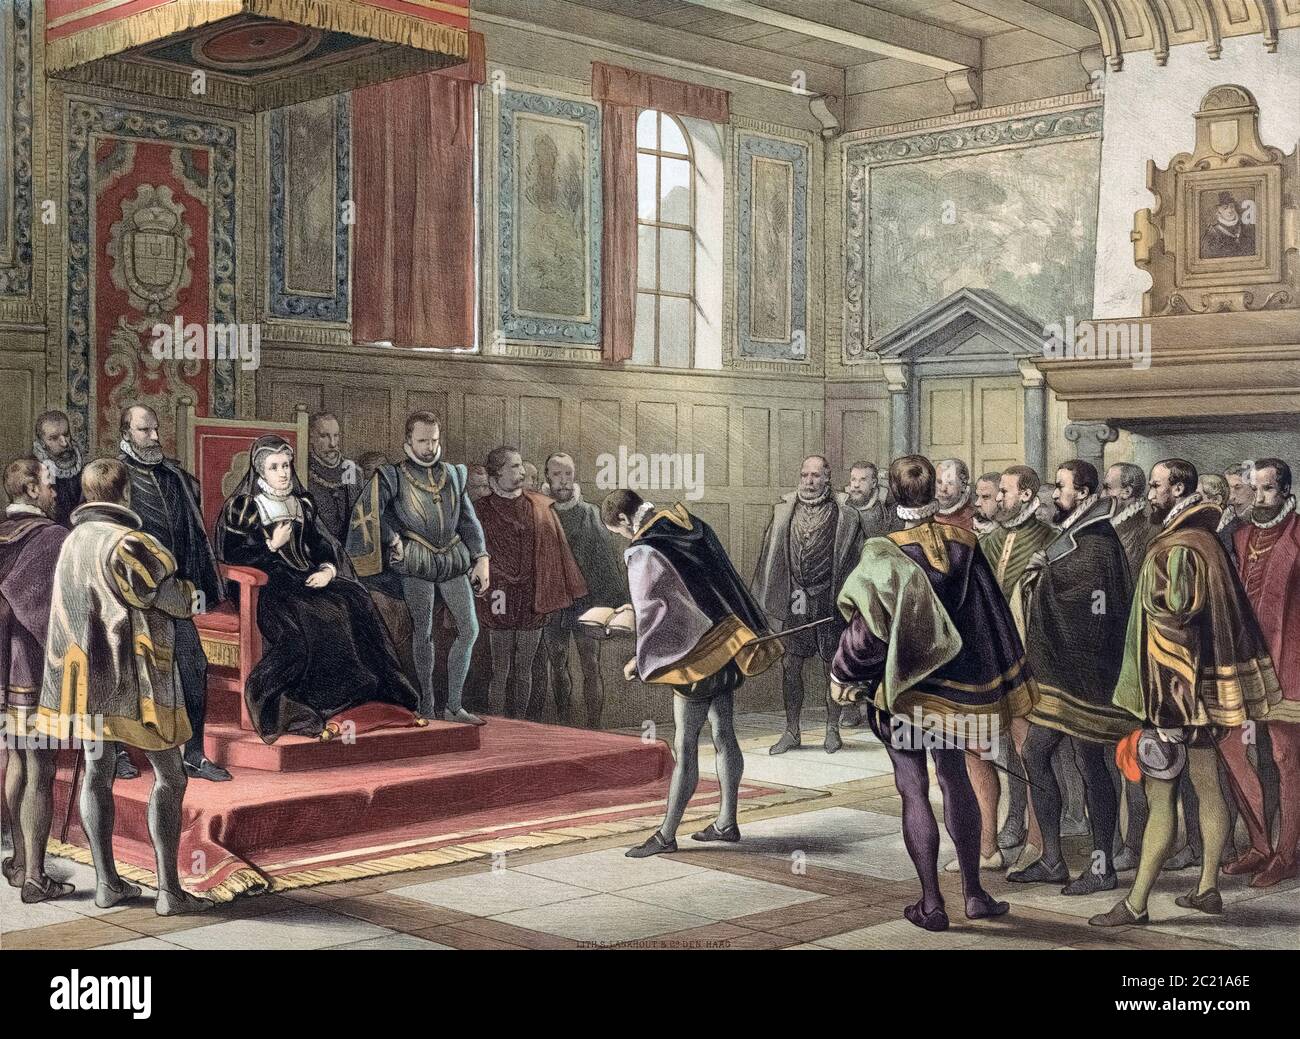 Representatives of the lesser nobility in the Habsburg Netherlands submit a petition to the Regent, Margaret of Parma.  Known as the Compromise or Covenant of Nobles it sought to have the government moderate the “placards” or ordinances against heresy imposed to suppress Protestant teachings.  After a 19th century illustration by Samuel Lankhout, after a work by Hendrik Albert van Trig. Stock Photo